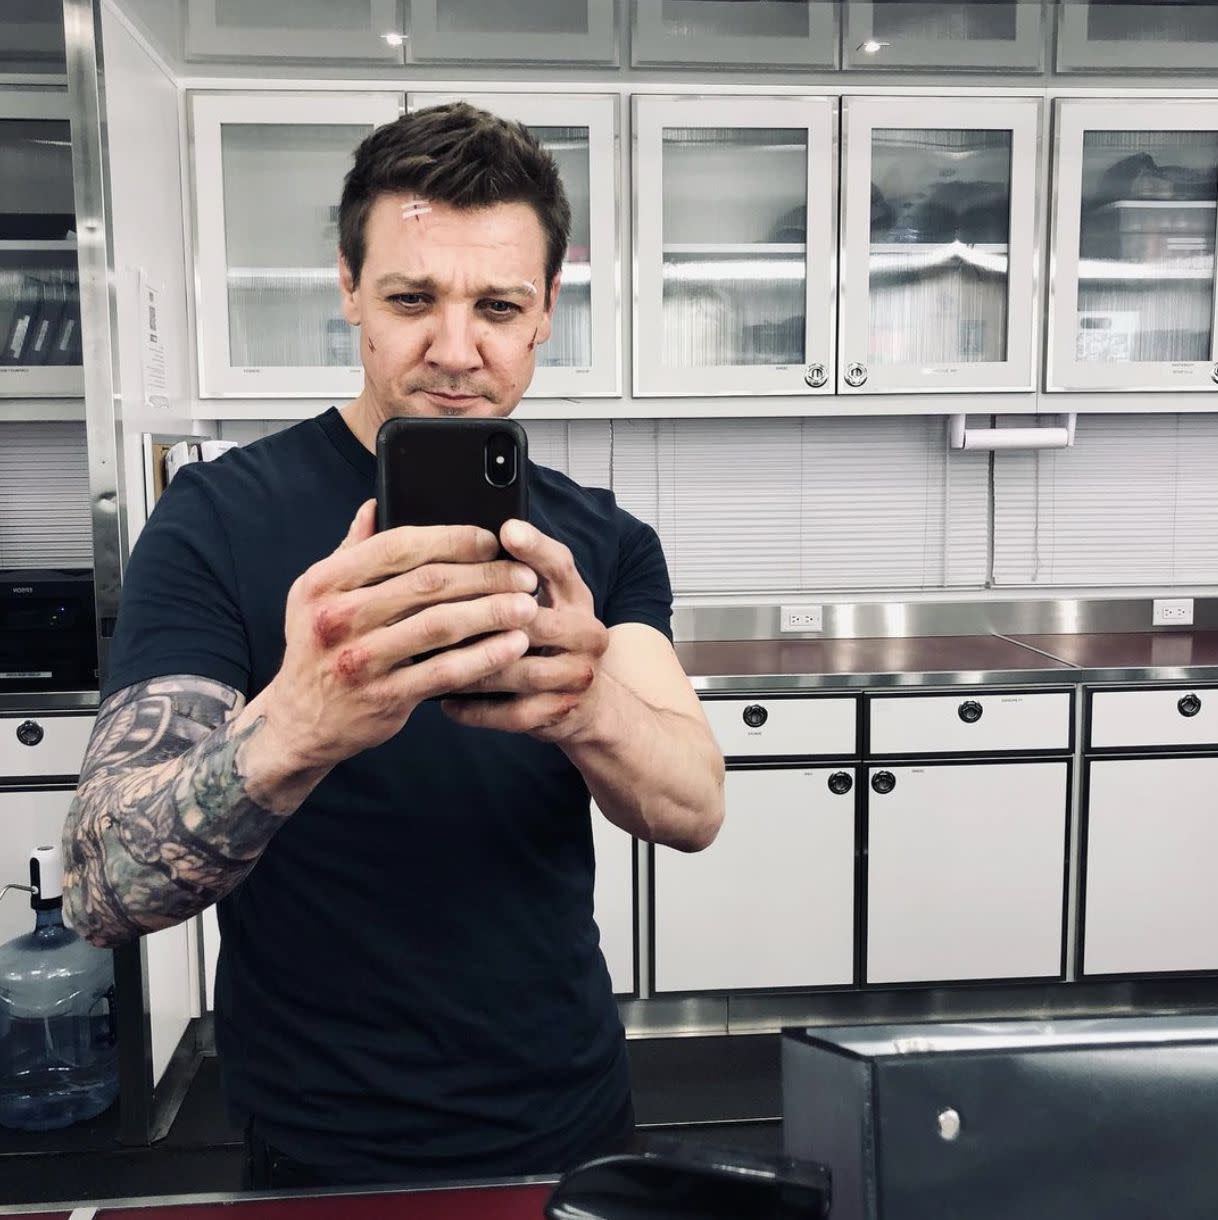 Jeremy Renner sports cuts and bruises while filming on set for the upcoming Disney+ show "Hawkeye." The 50-year-old actor captioned the behind-the-scenes snap: "At least it’s not Monday"